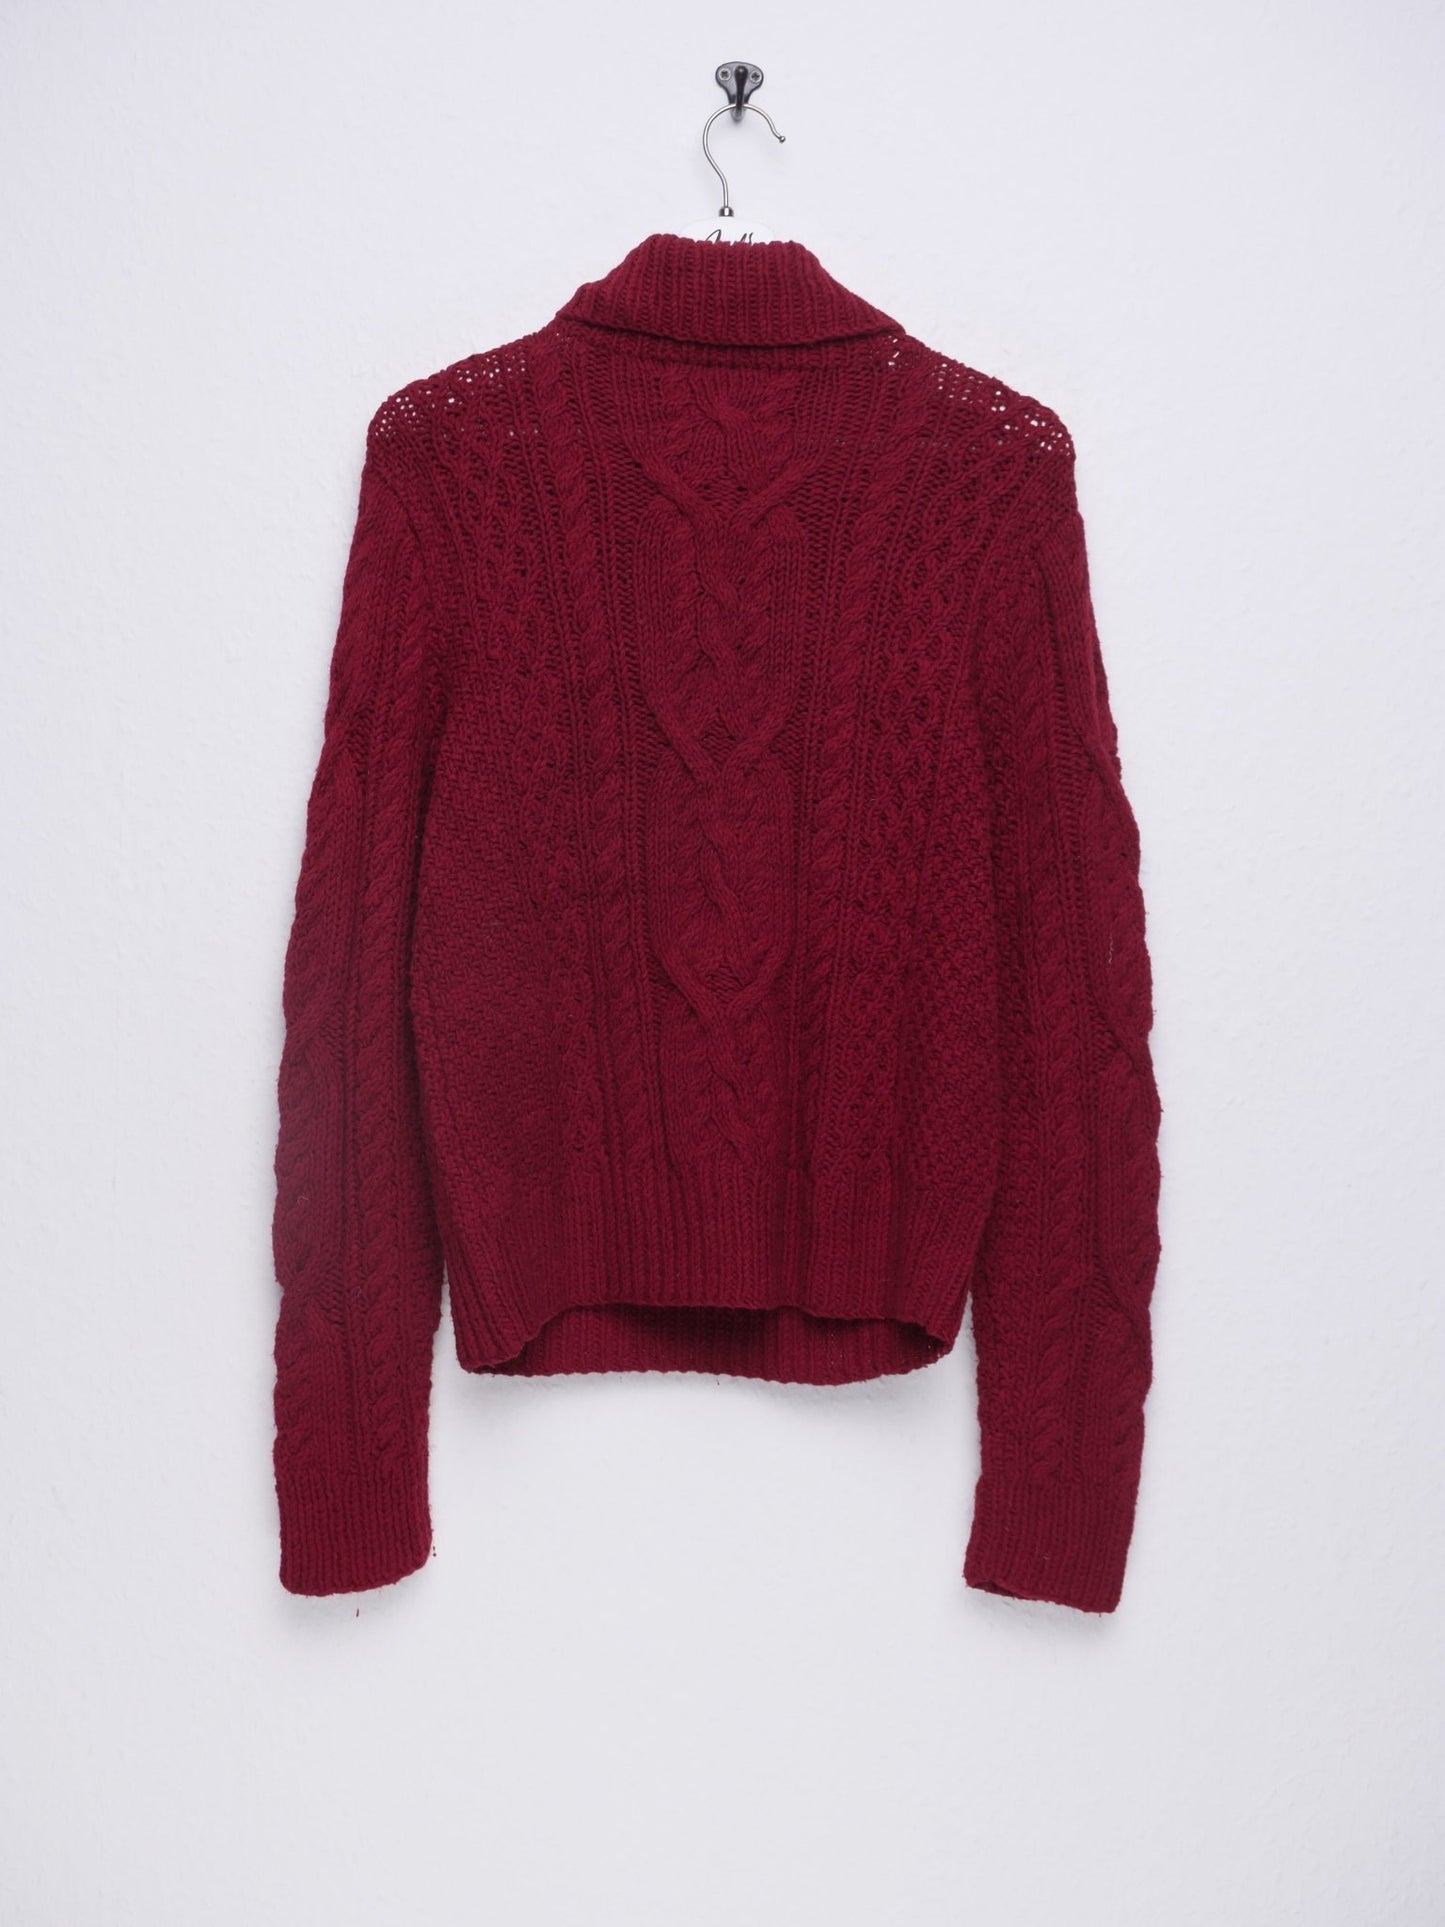 polo patterned wool turtle neck Sweater - Peeces